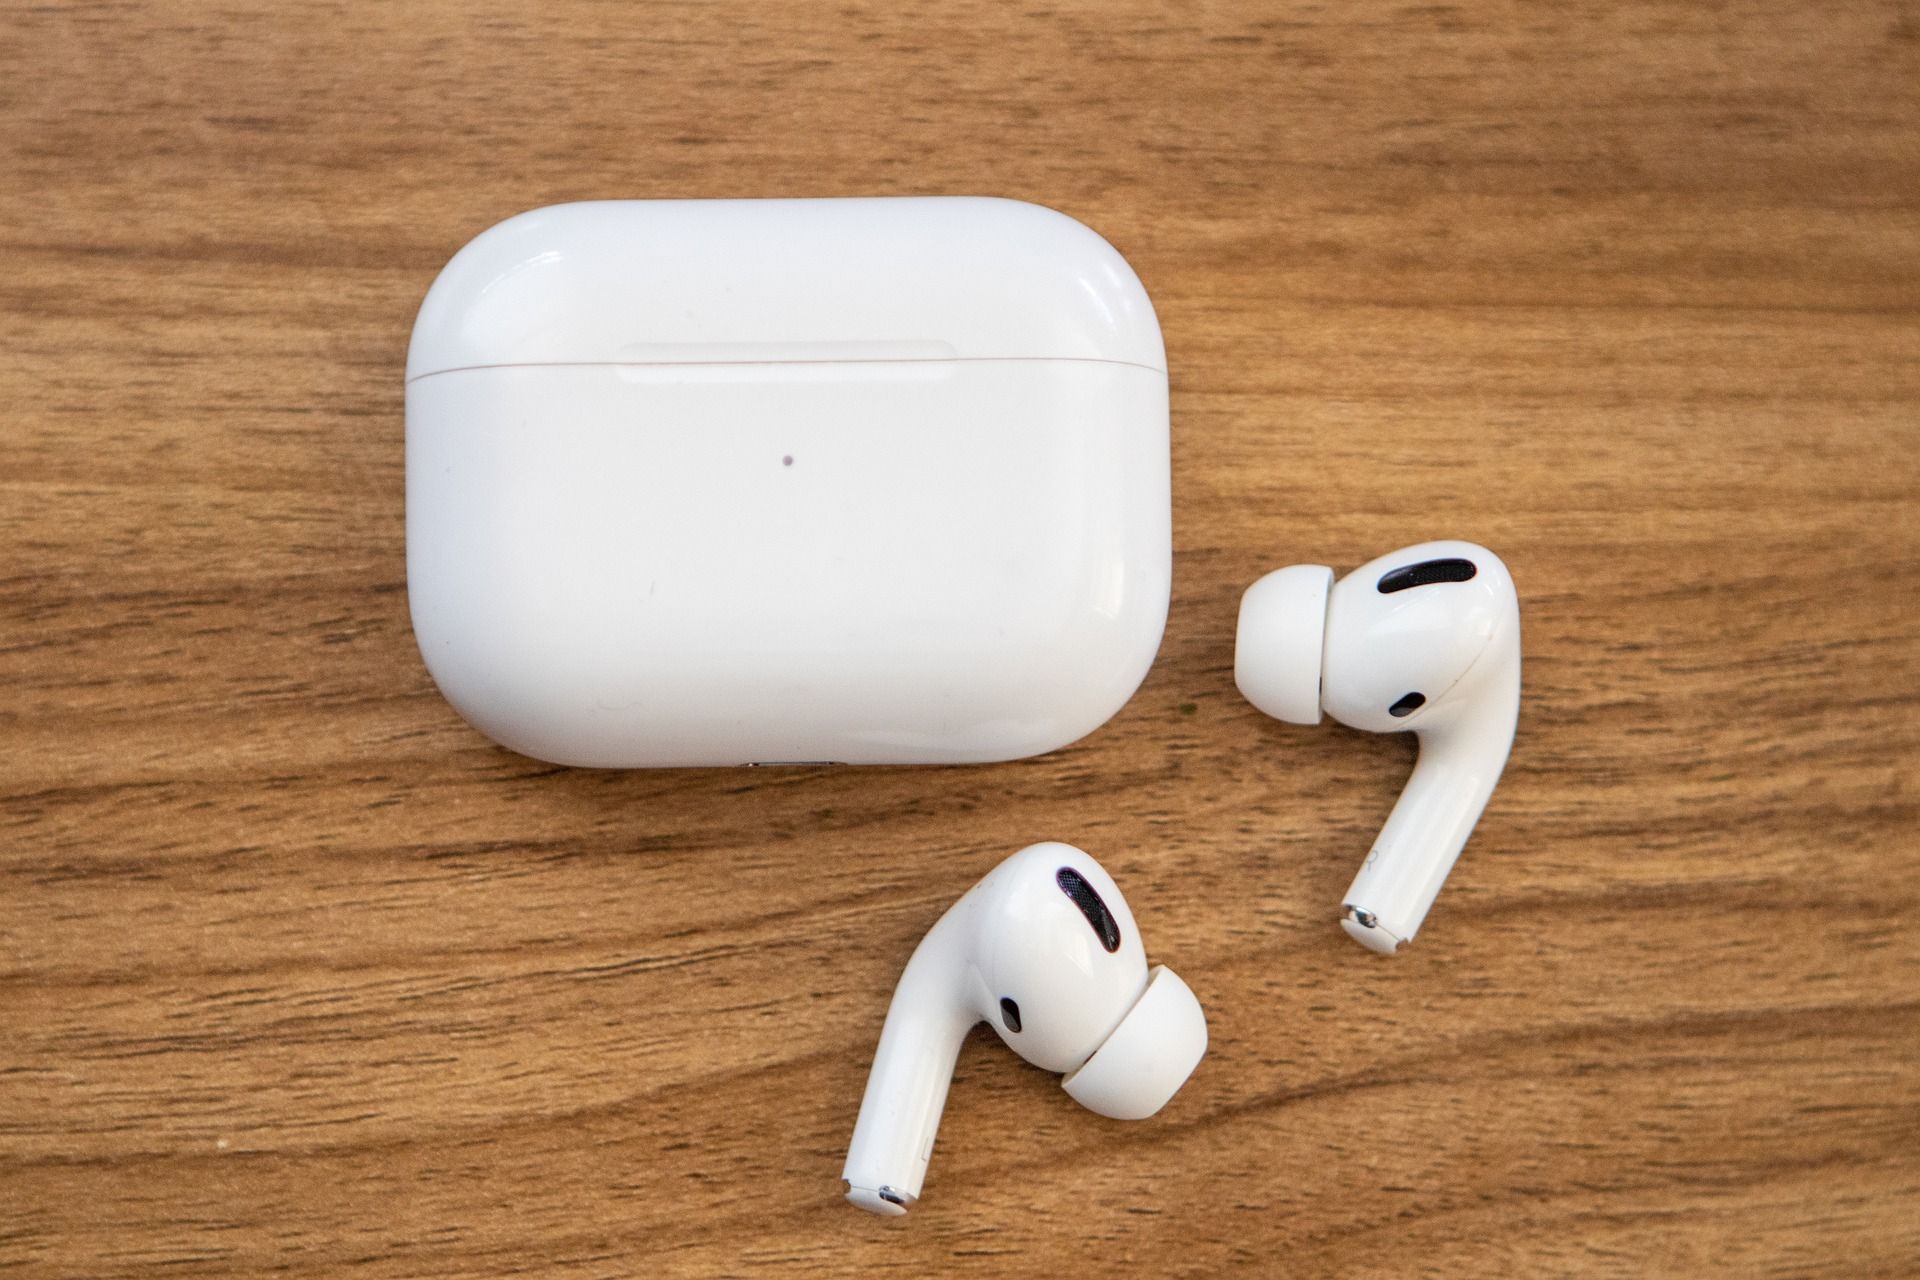 airpods-g76a3fed48_1920